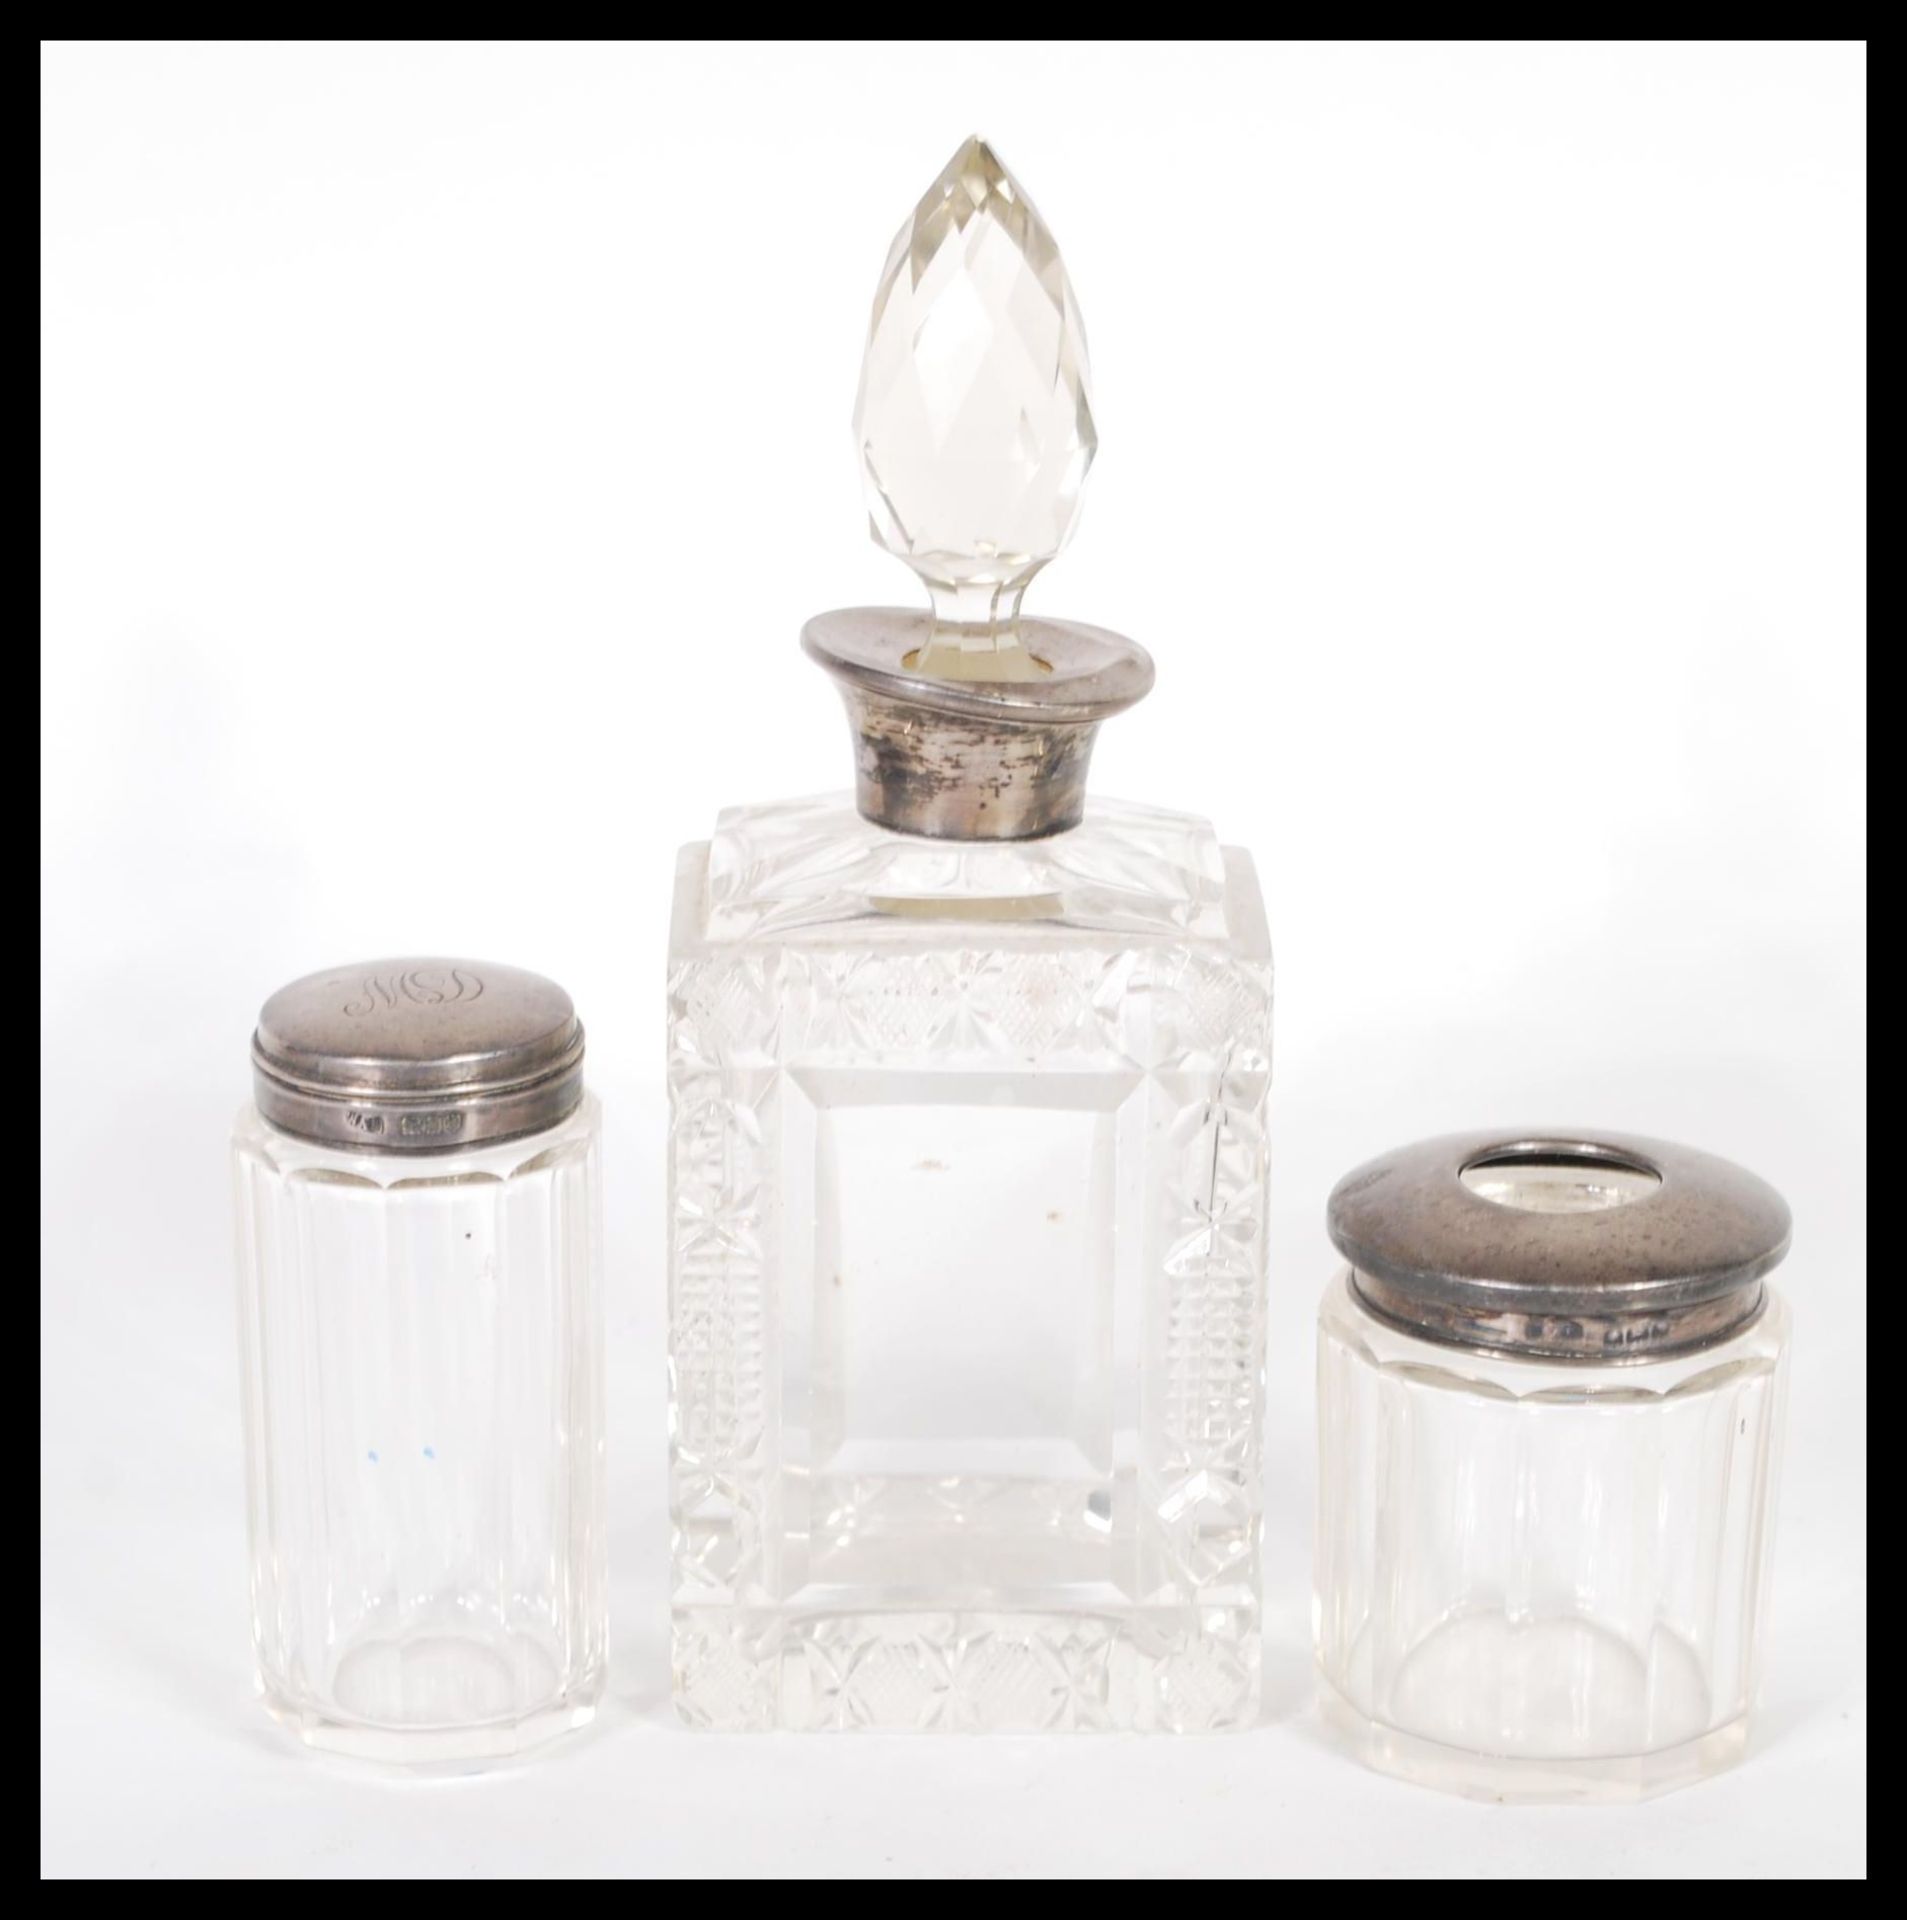 A early 20th century silver topped, cut glass perfume bottle with a glass stopper, makers mark